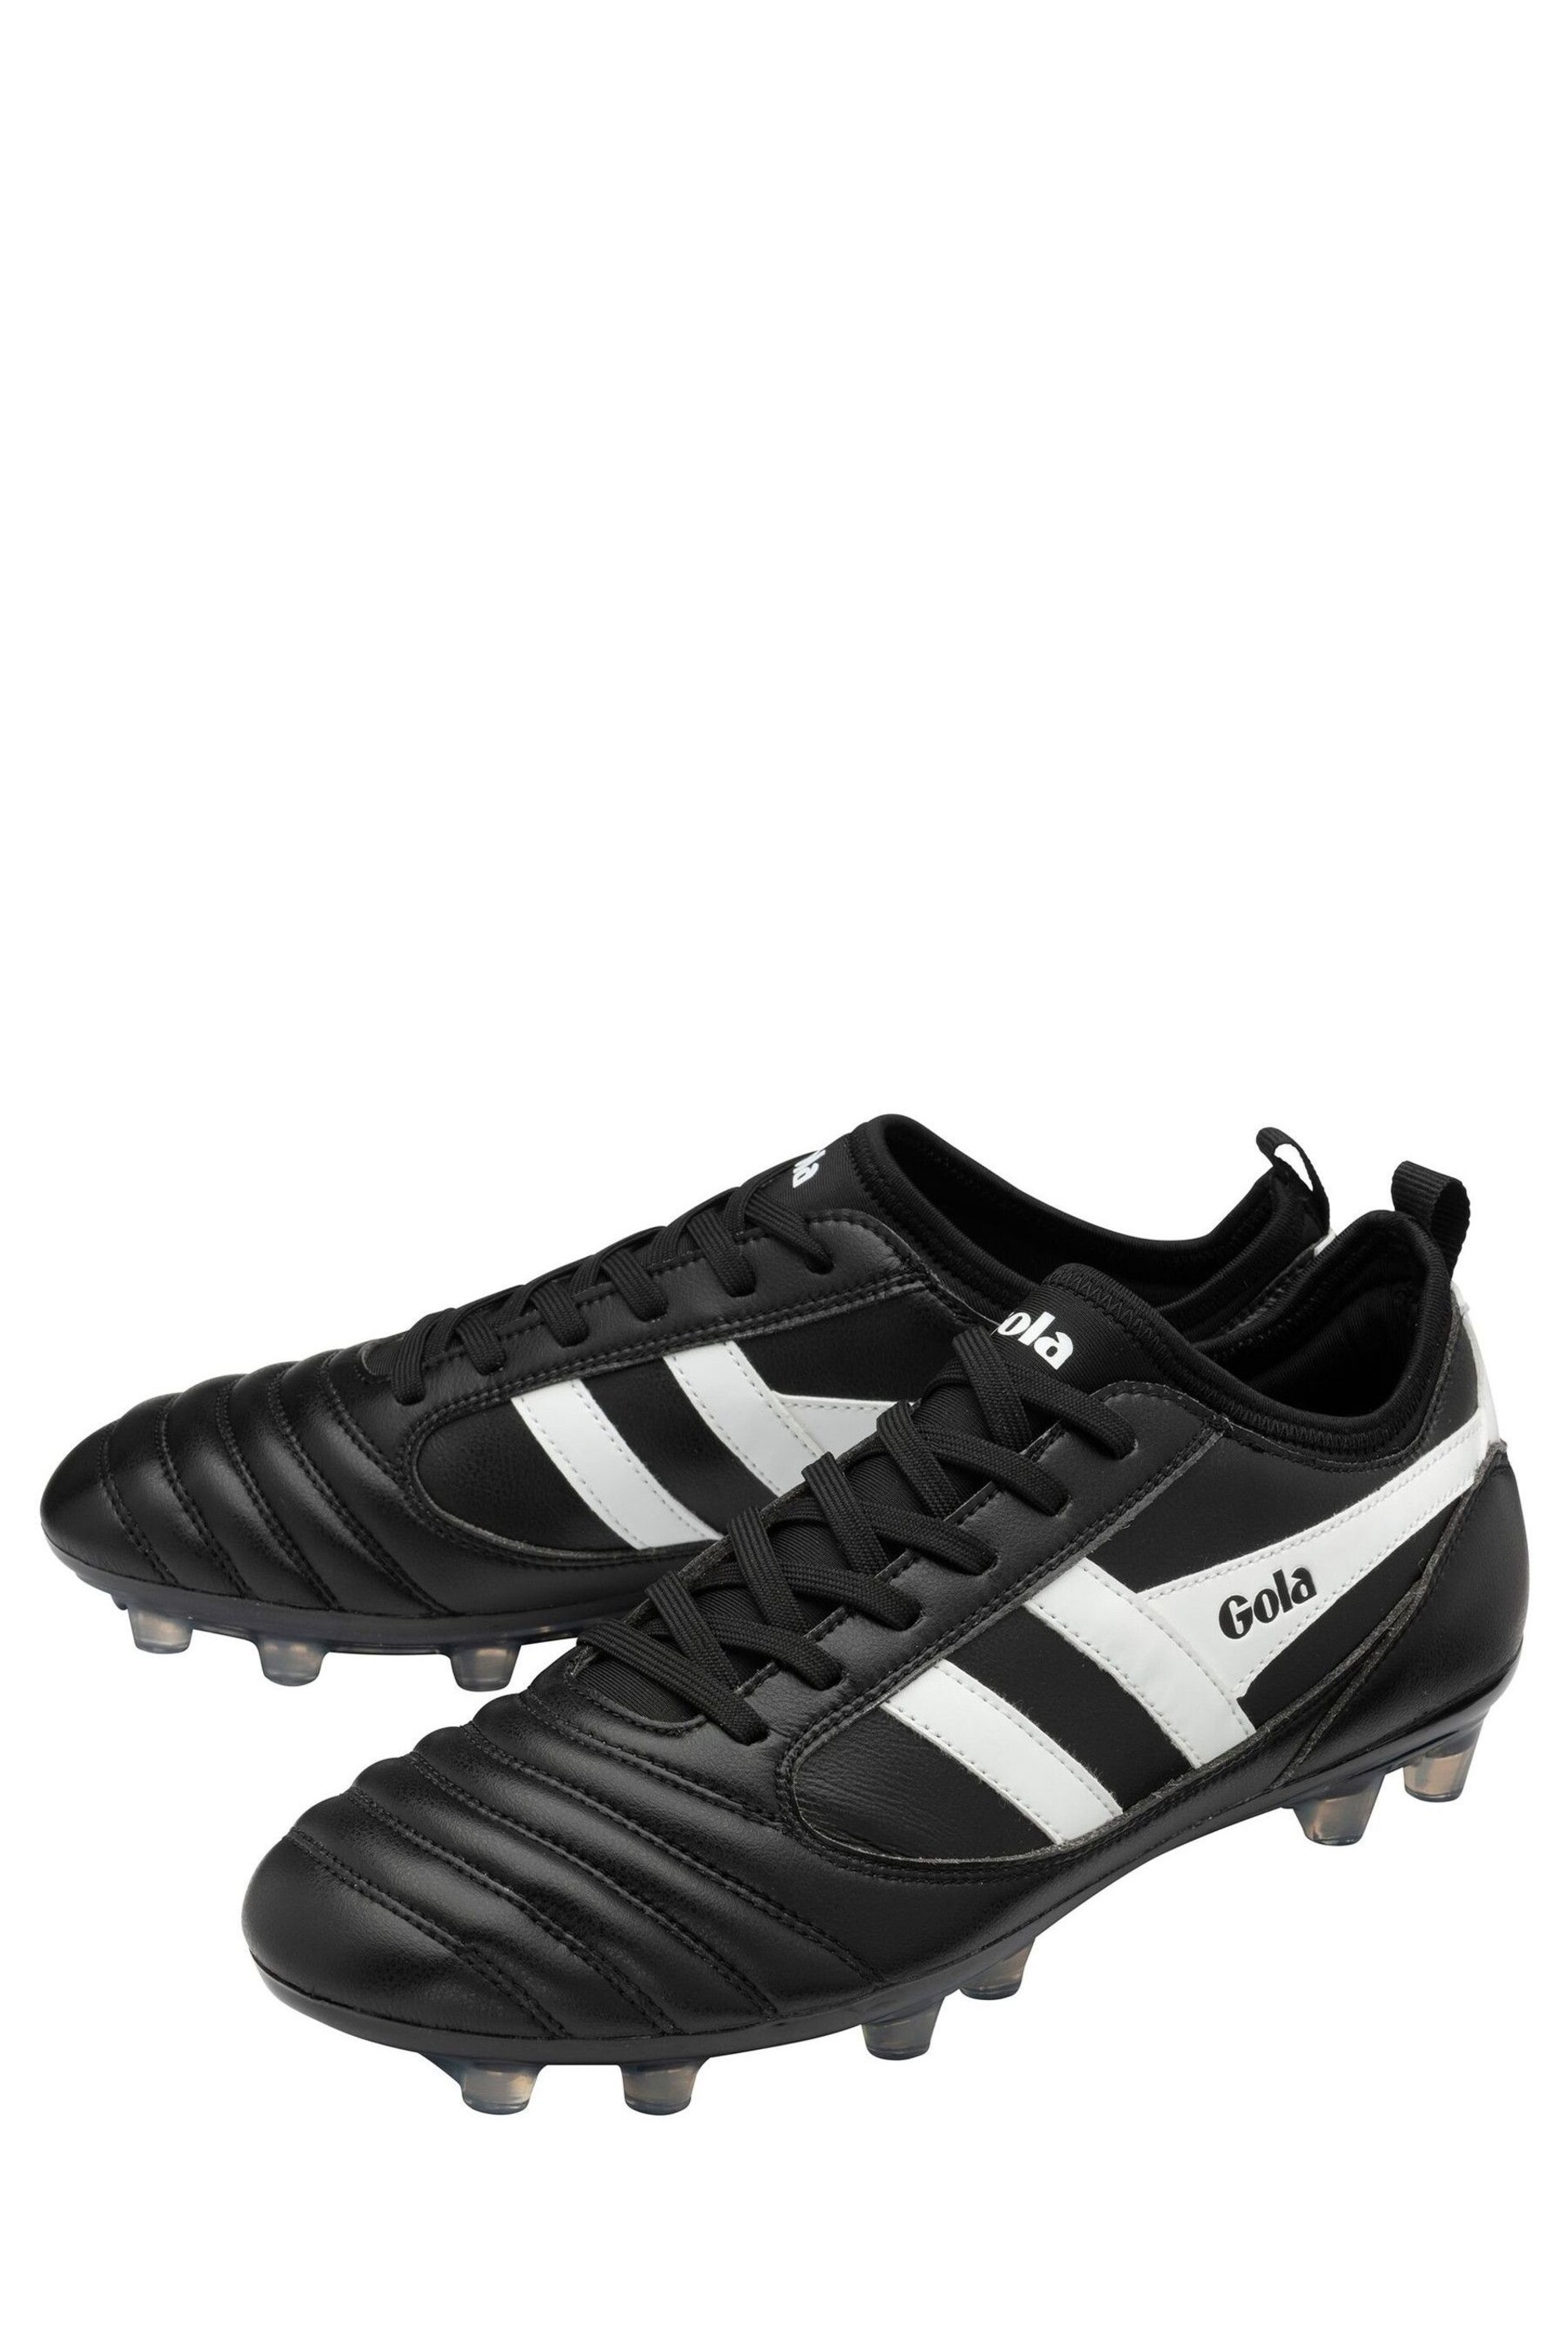 Gola Black/White Mens Ceptor MLD Pro Microfibre Lace-Up Football Boots - Image 2 of 5